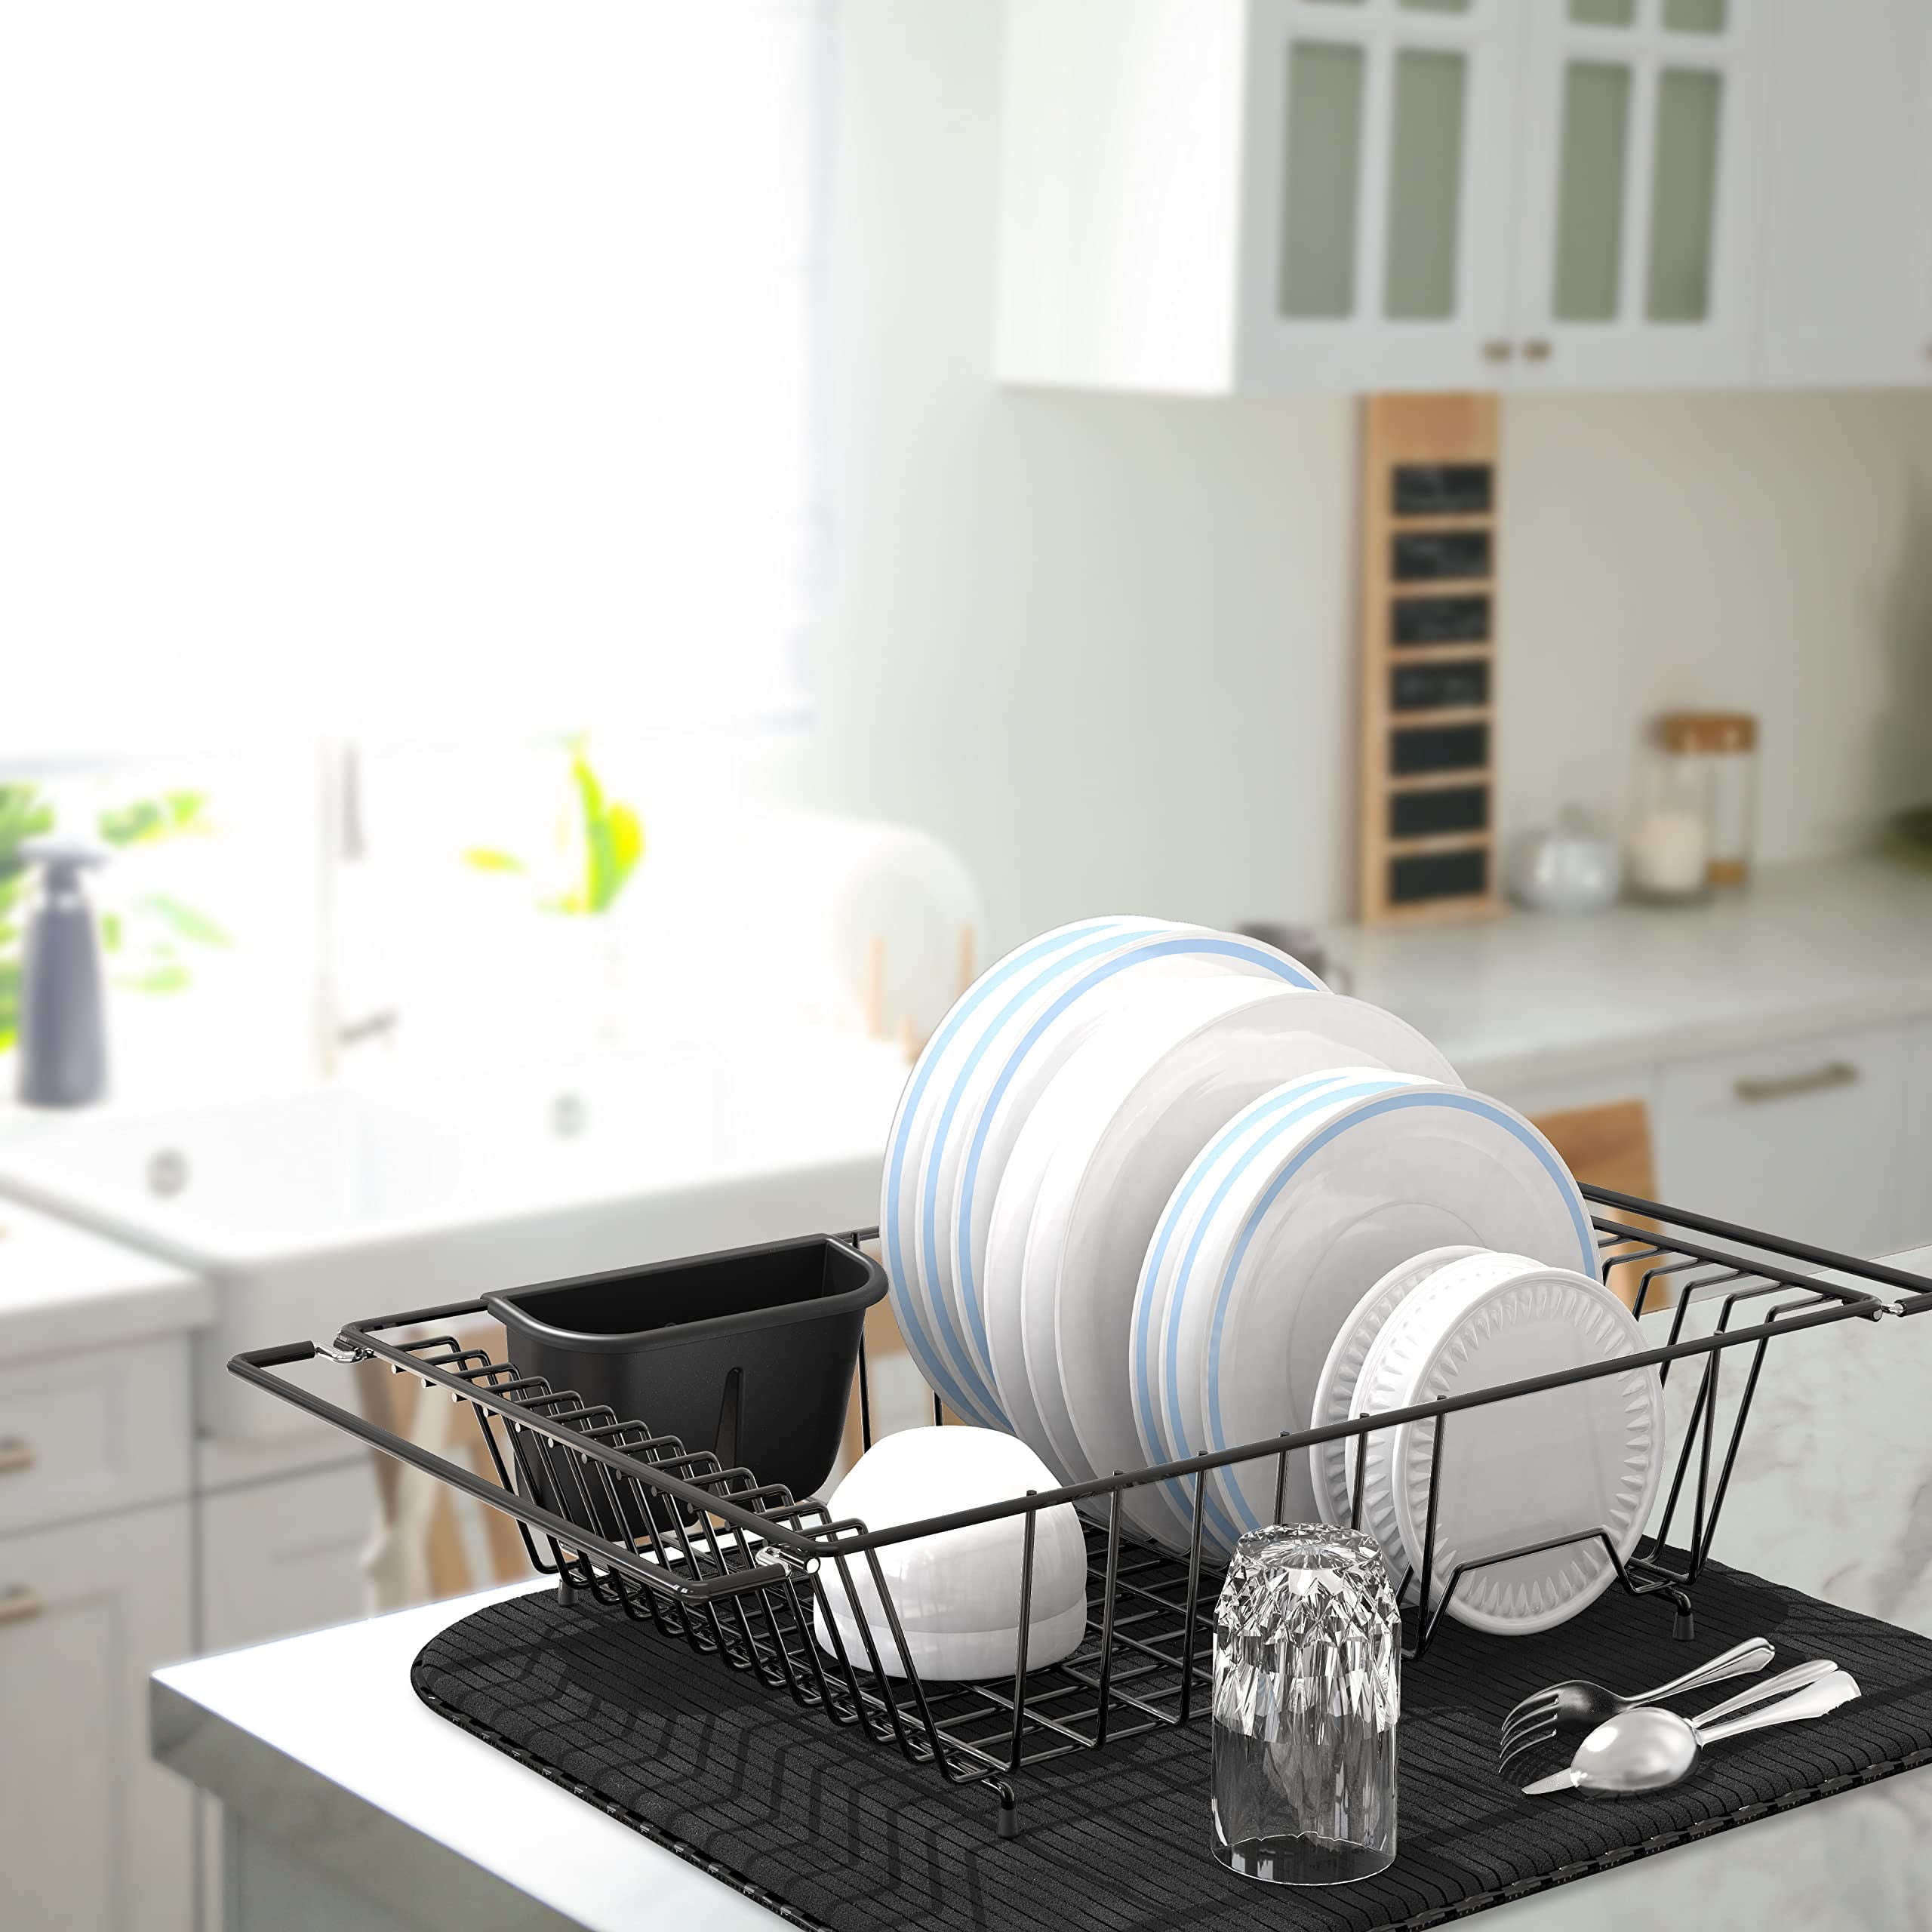 Don Hierro Dish Drying Rack for Kitchen Counter, Steel, White. Drop